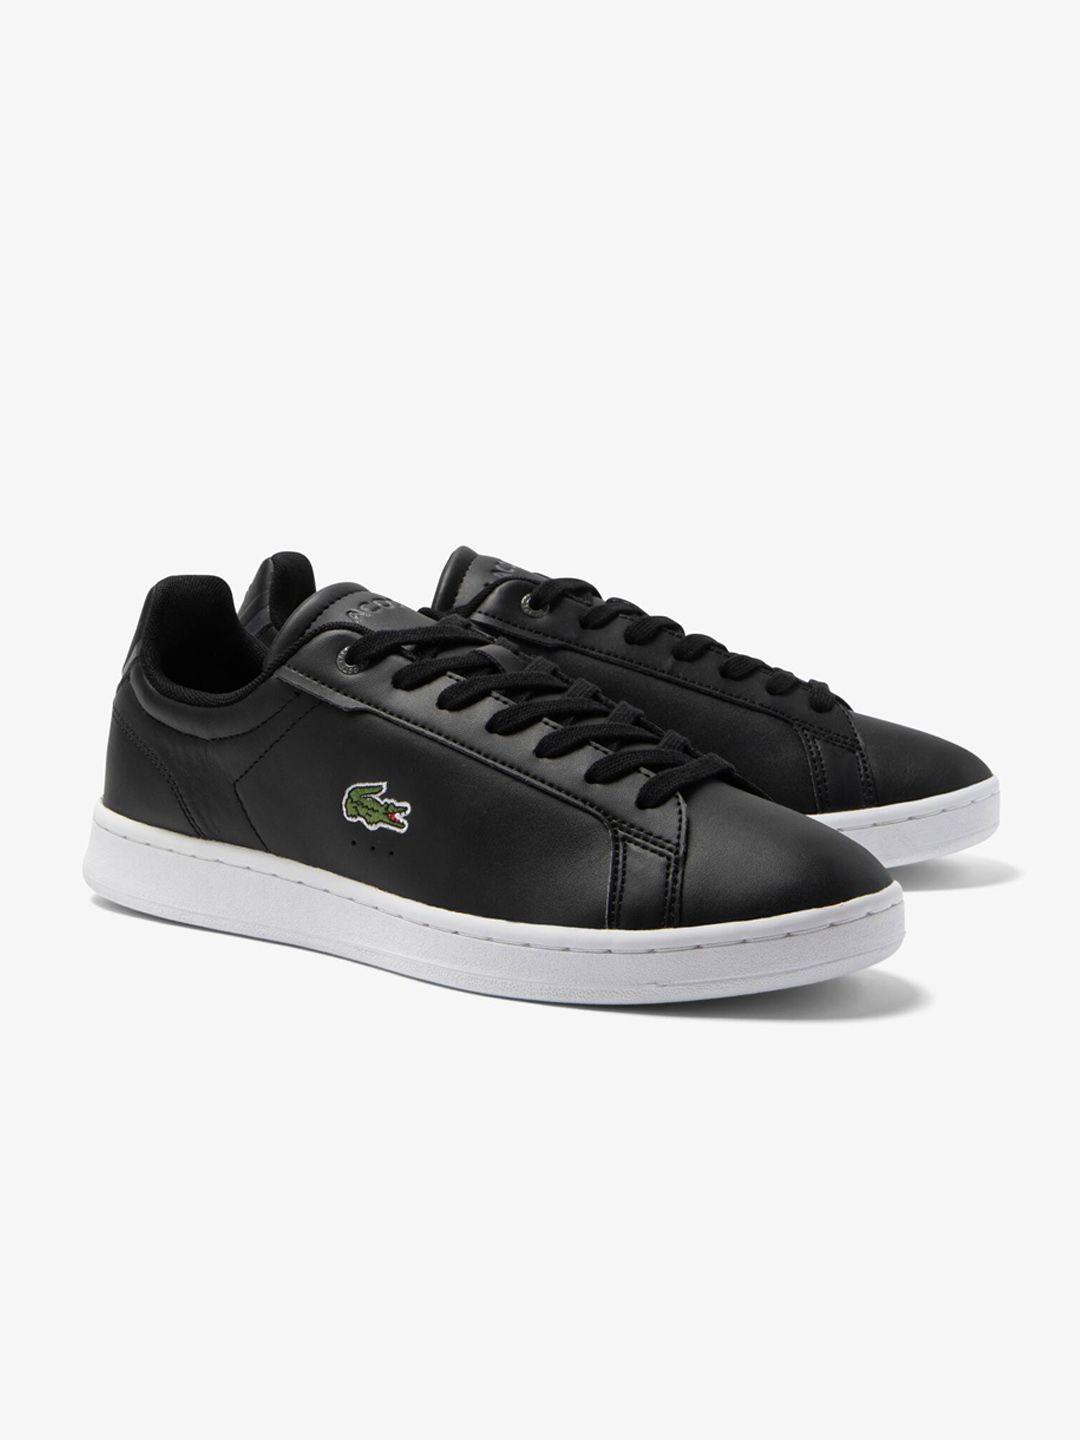 lacoste-men-leather-comfort-insole-contrast-sole-sneakers